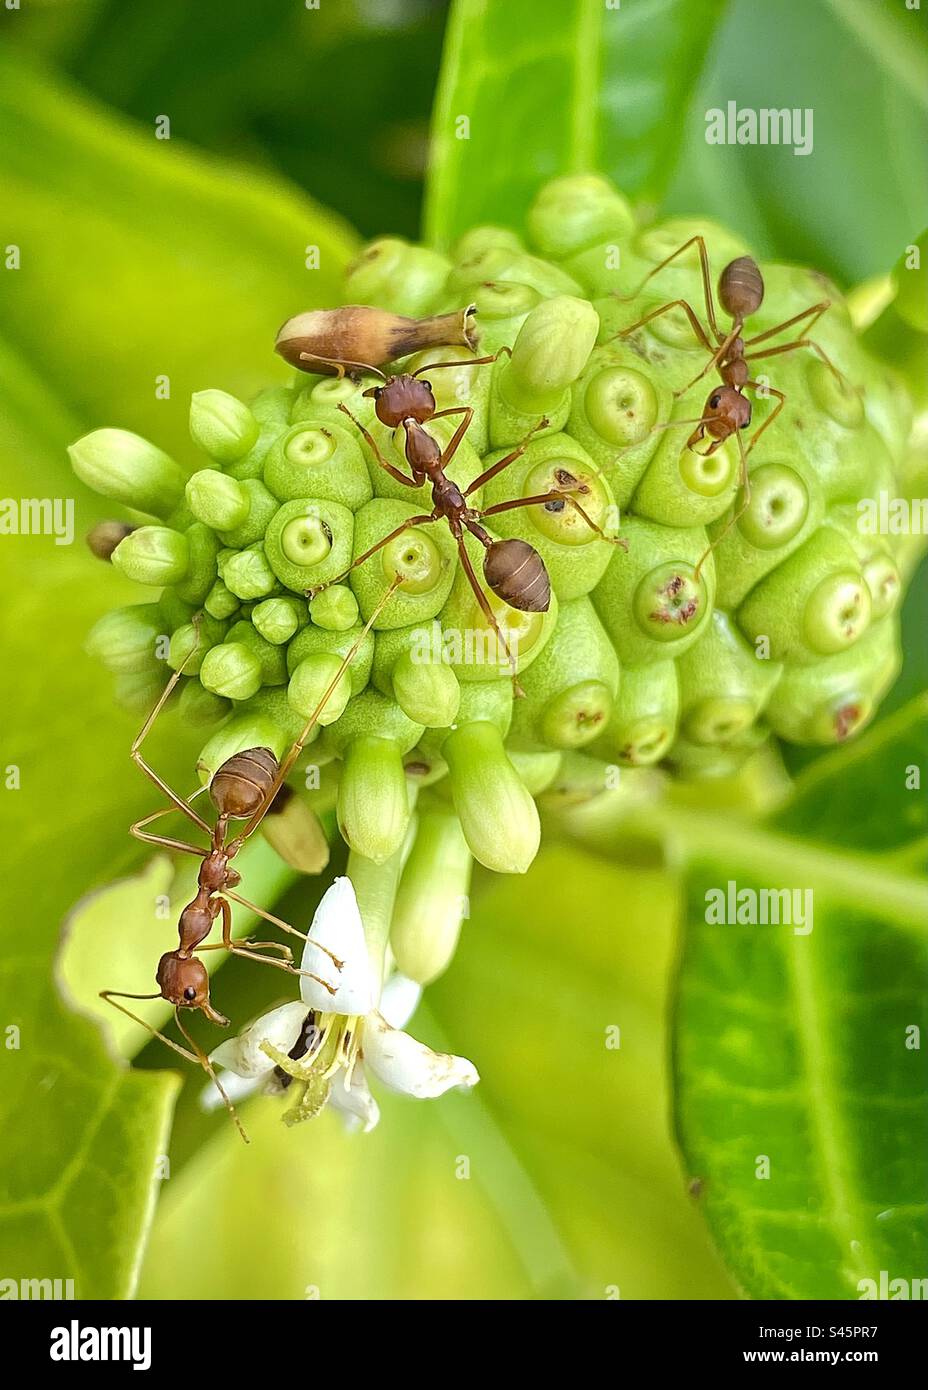 Outdoors photography of the ants is on the wild fruit photoshoot. Stock Photo